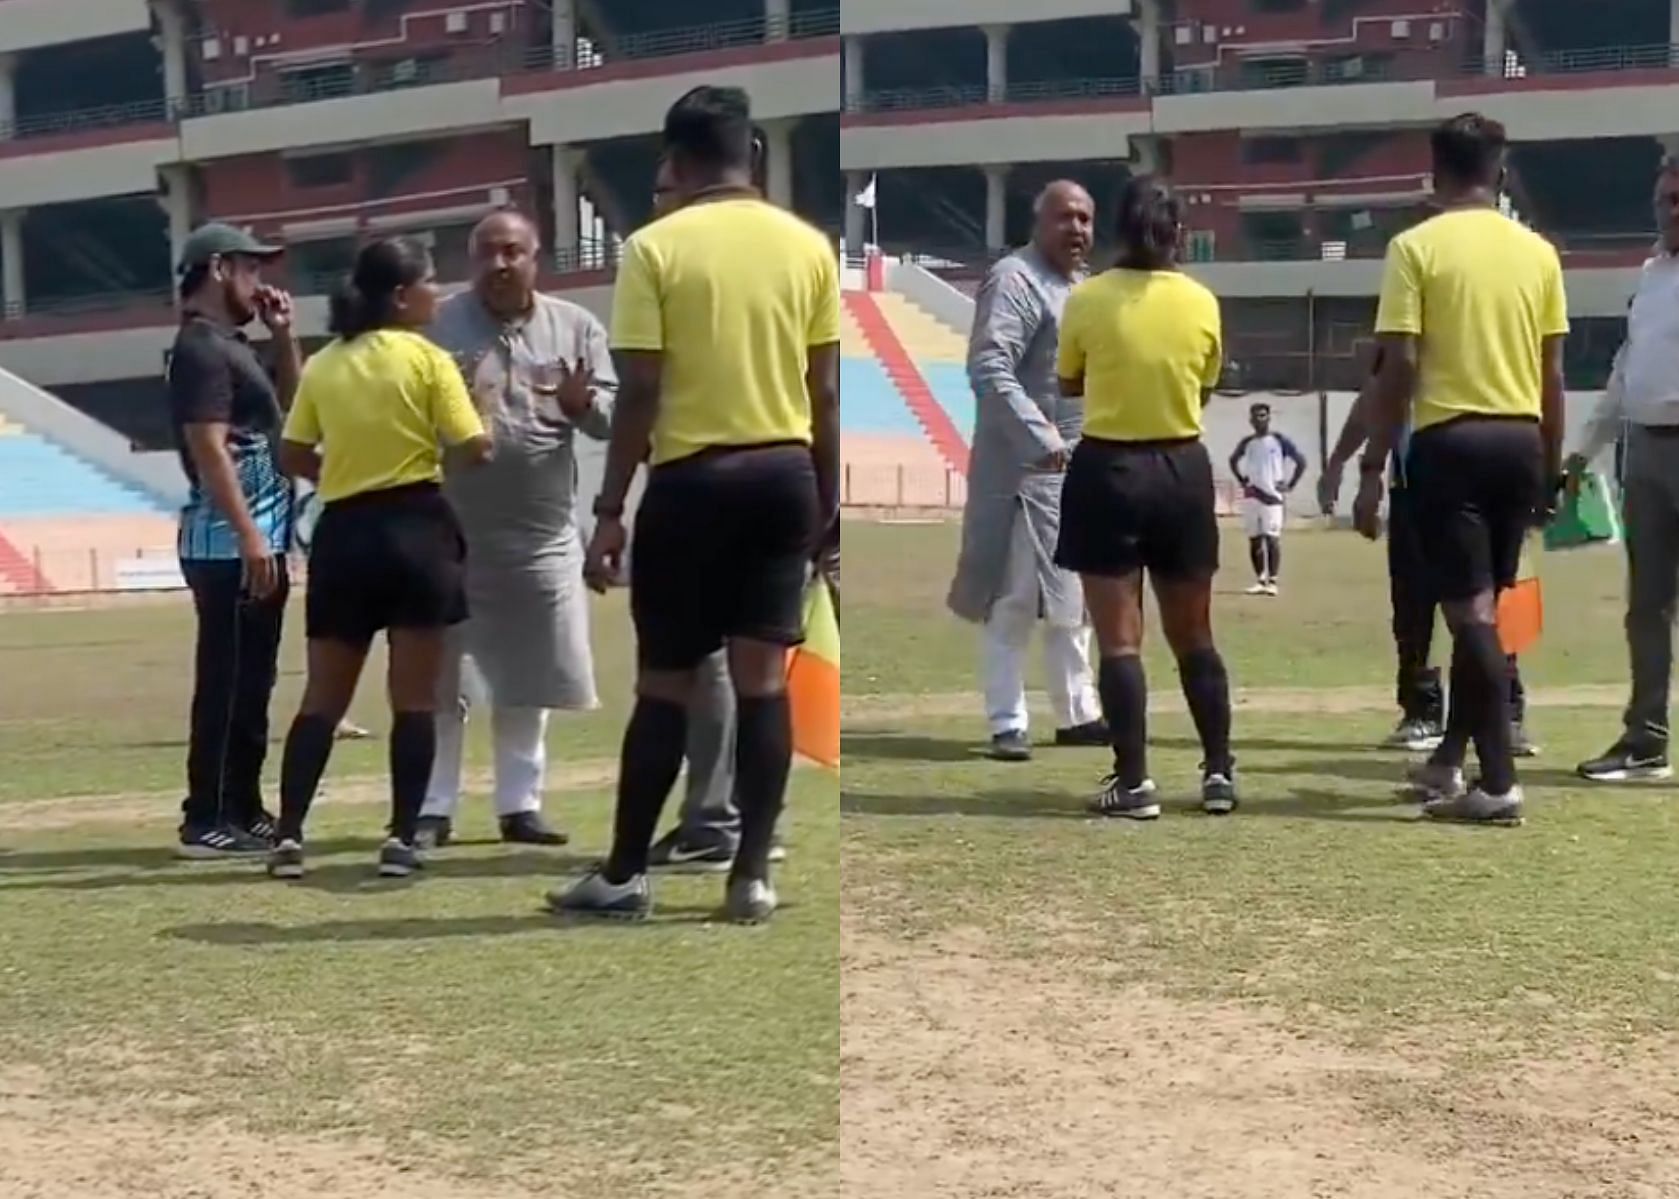 A male club official threatens female referee. (Credit: Videograb/X)